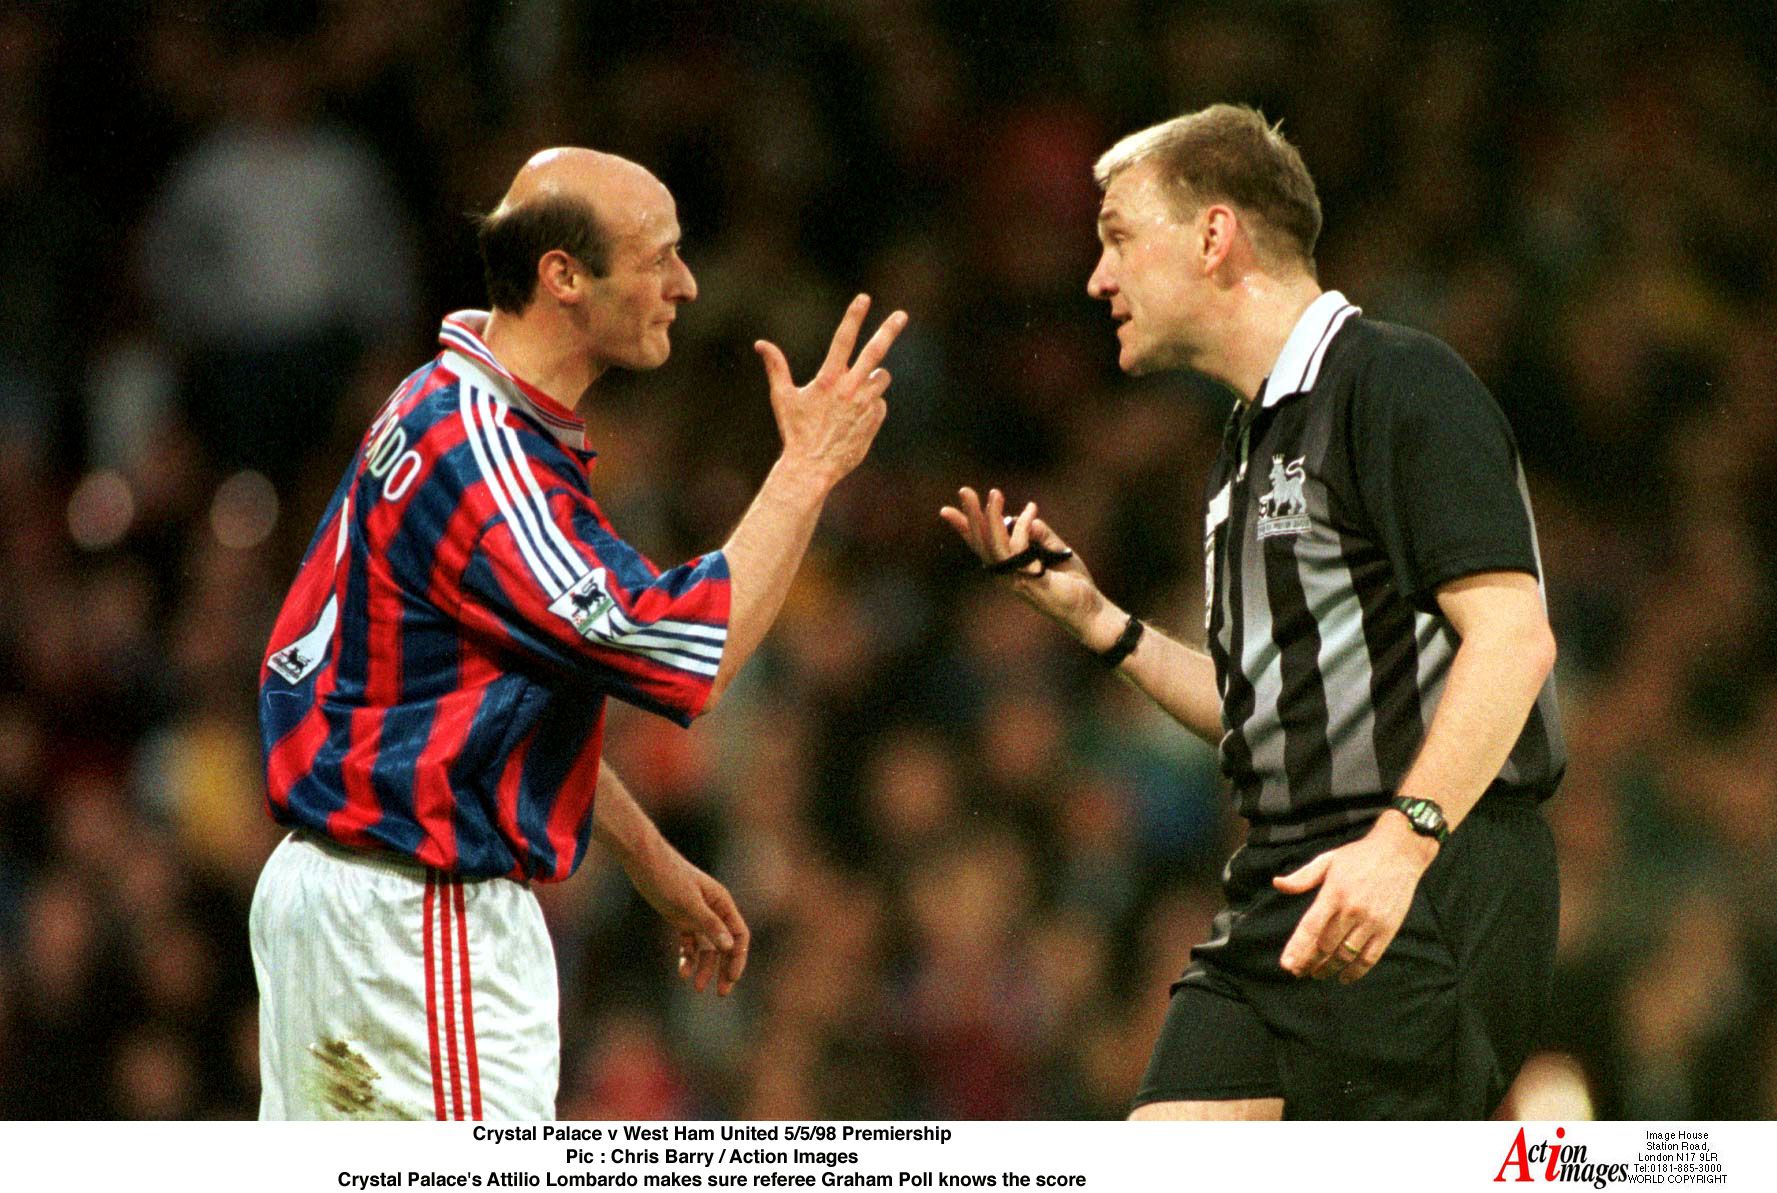 Crystal Palace v West Ham United 5/5/98 Premiership 
Pic : Chris Barry / Action Images 
Crystal Palace's Attilio Lombardo makes sure referee Graham Poll knows the score